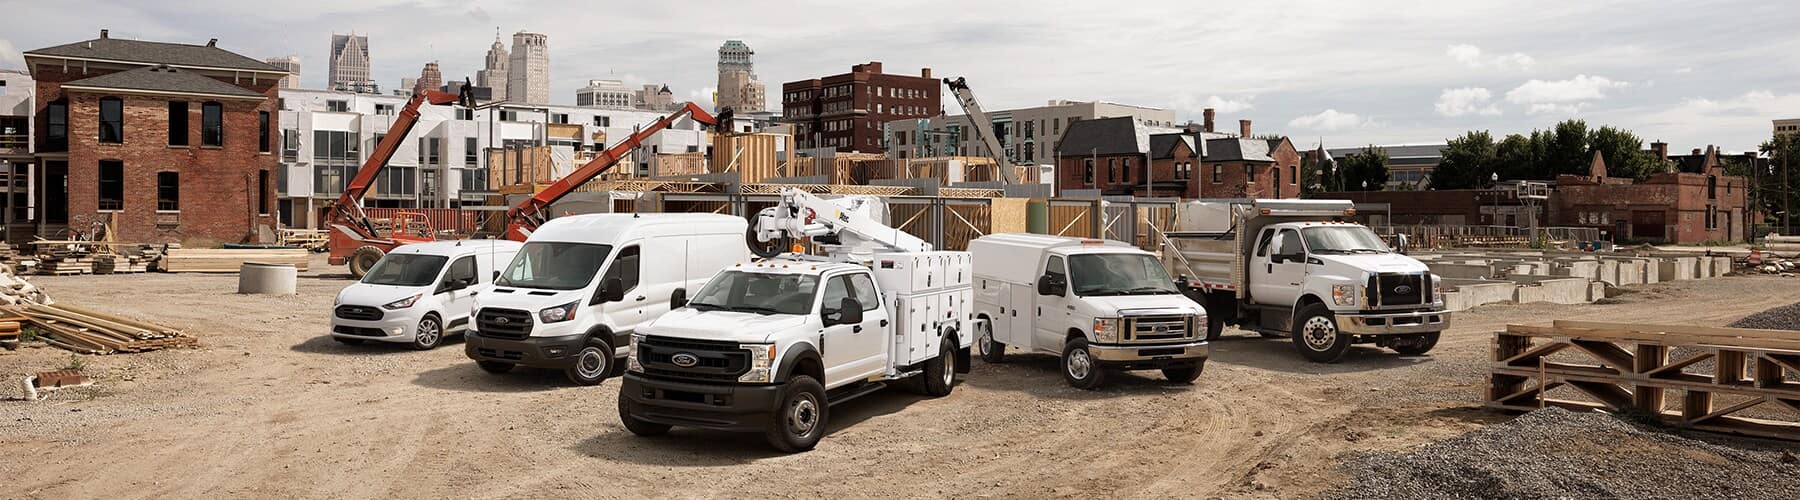 Ford commercial trucks parked in construction site